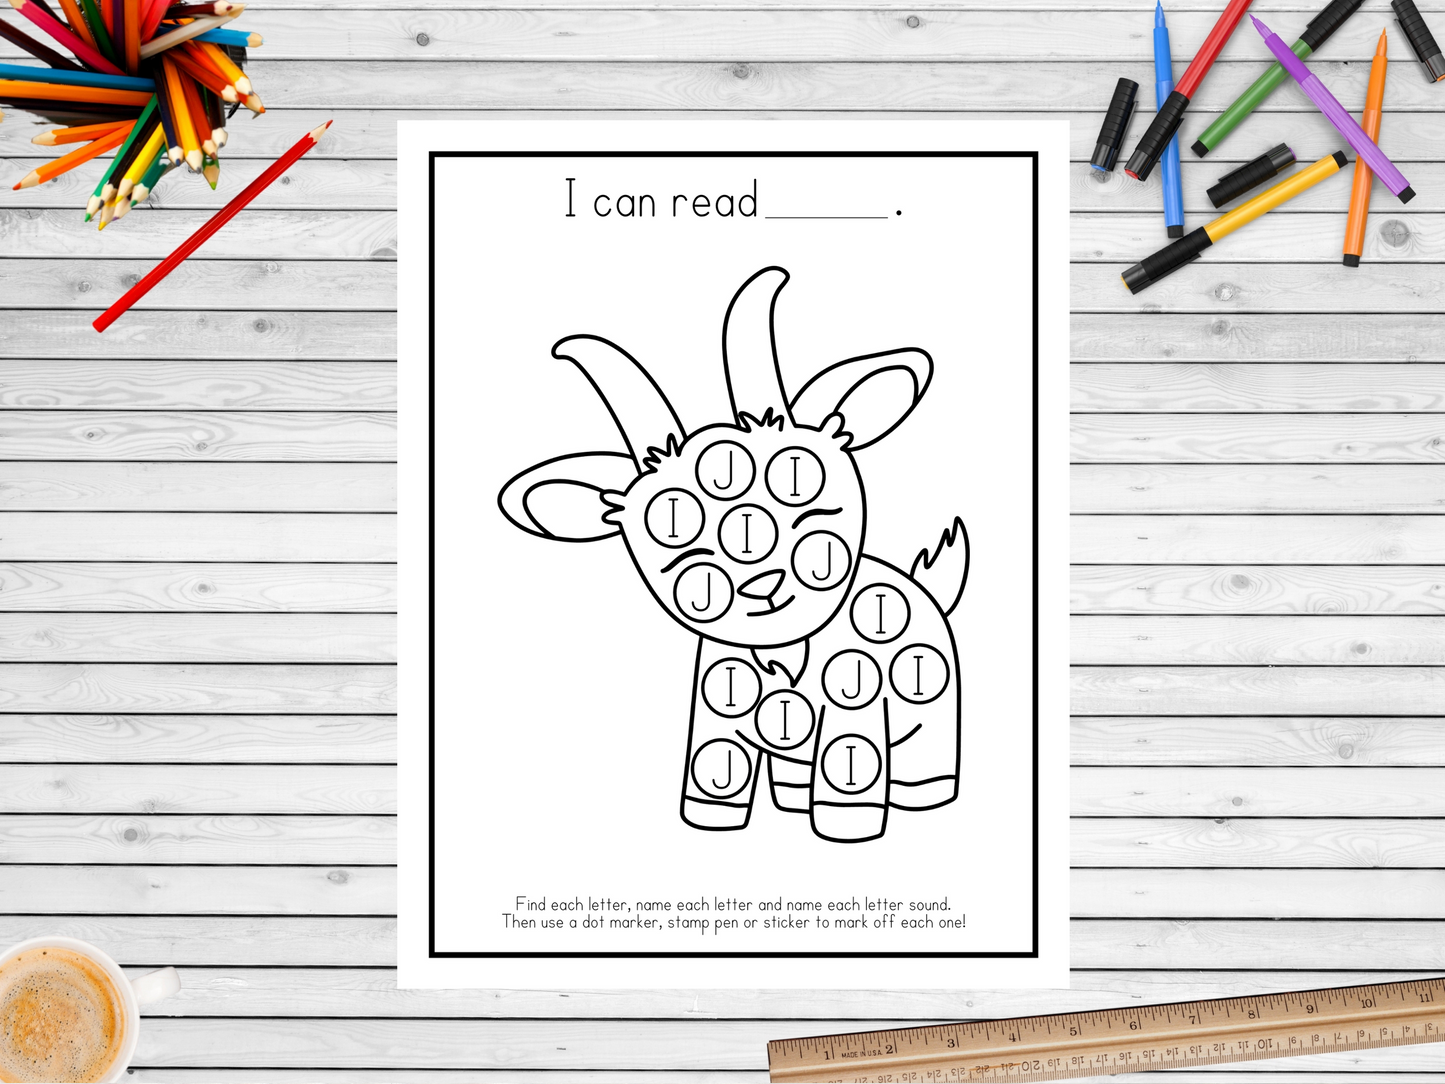 Dot Marker Alphabet Practice Coloring Pages | Capital + Lowercase Letters